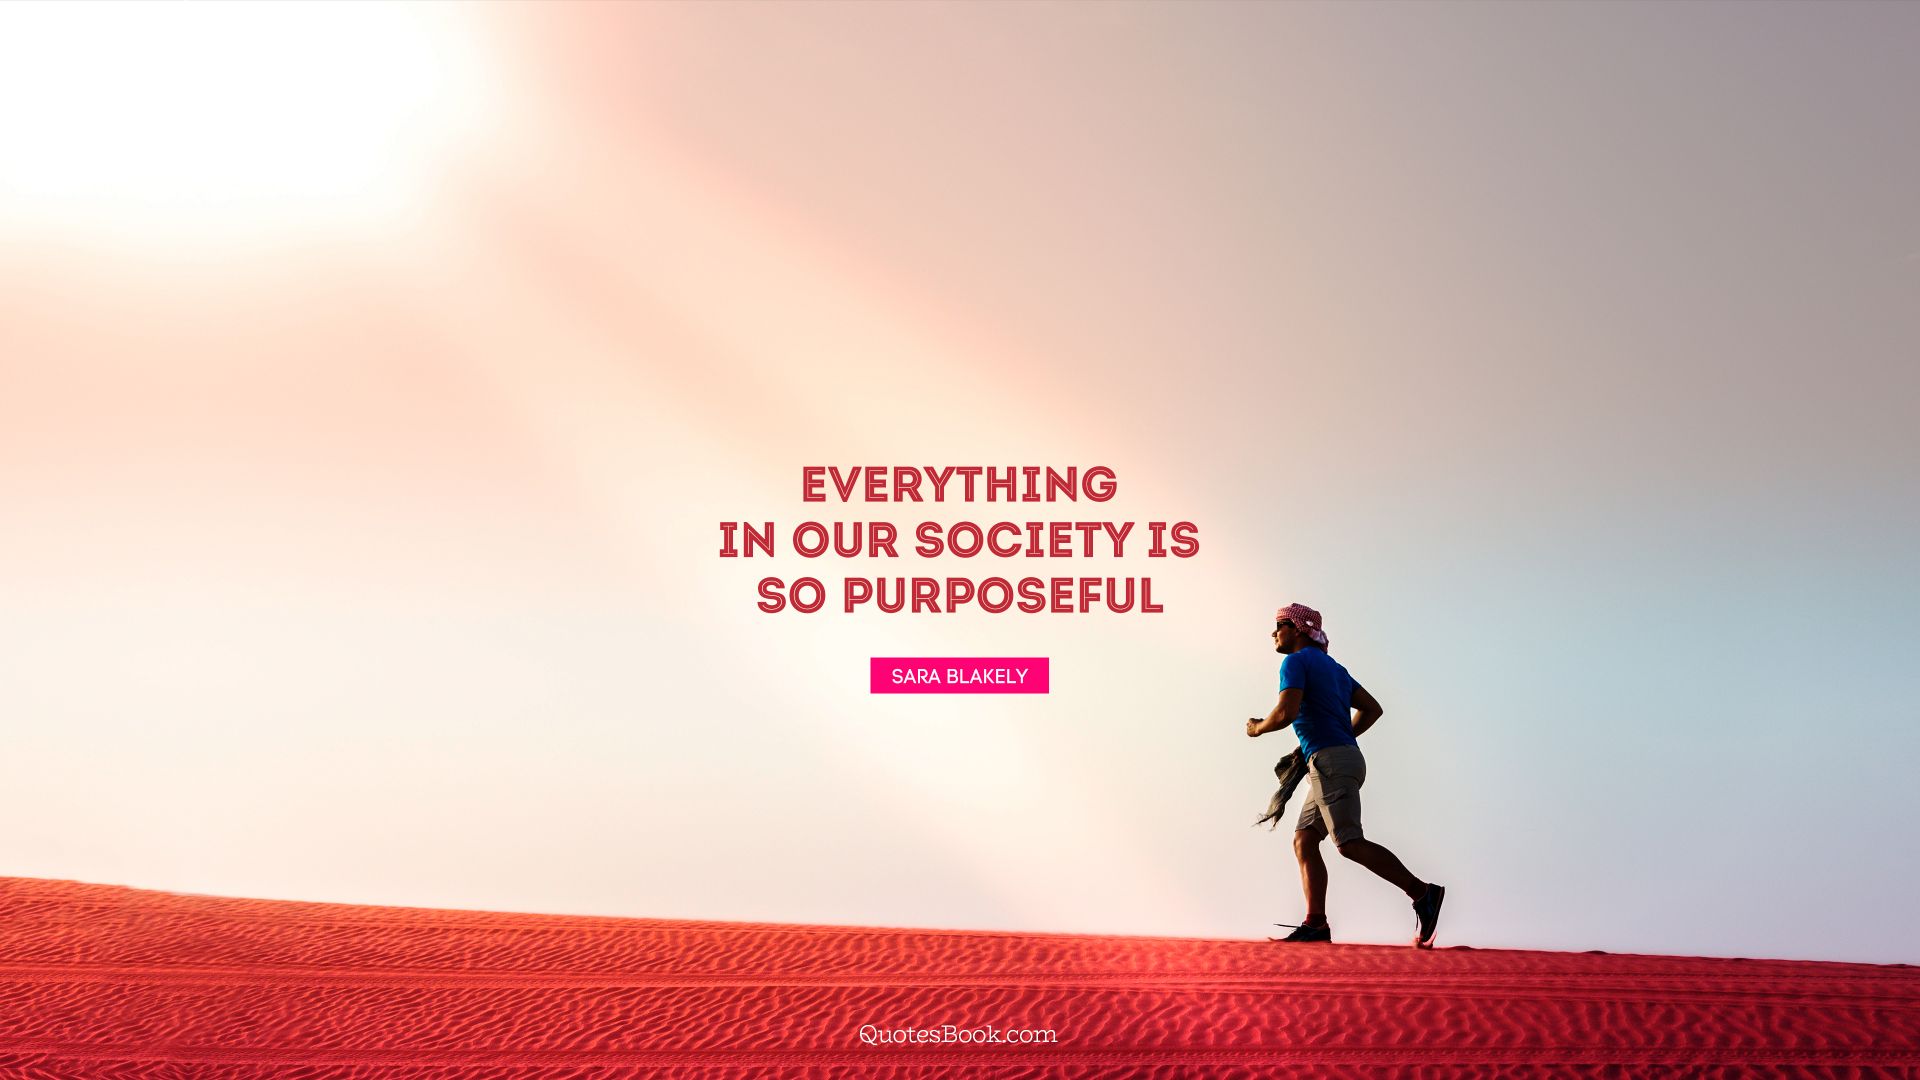 Everything in our society is so purposeful. - Quote by Sara Blakely